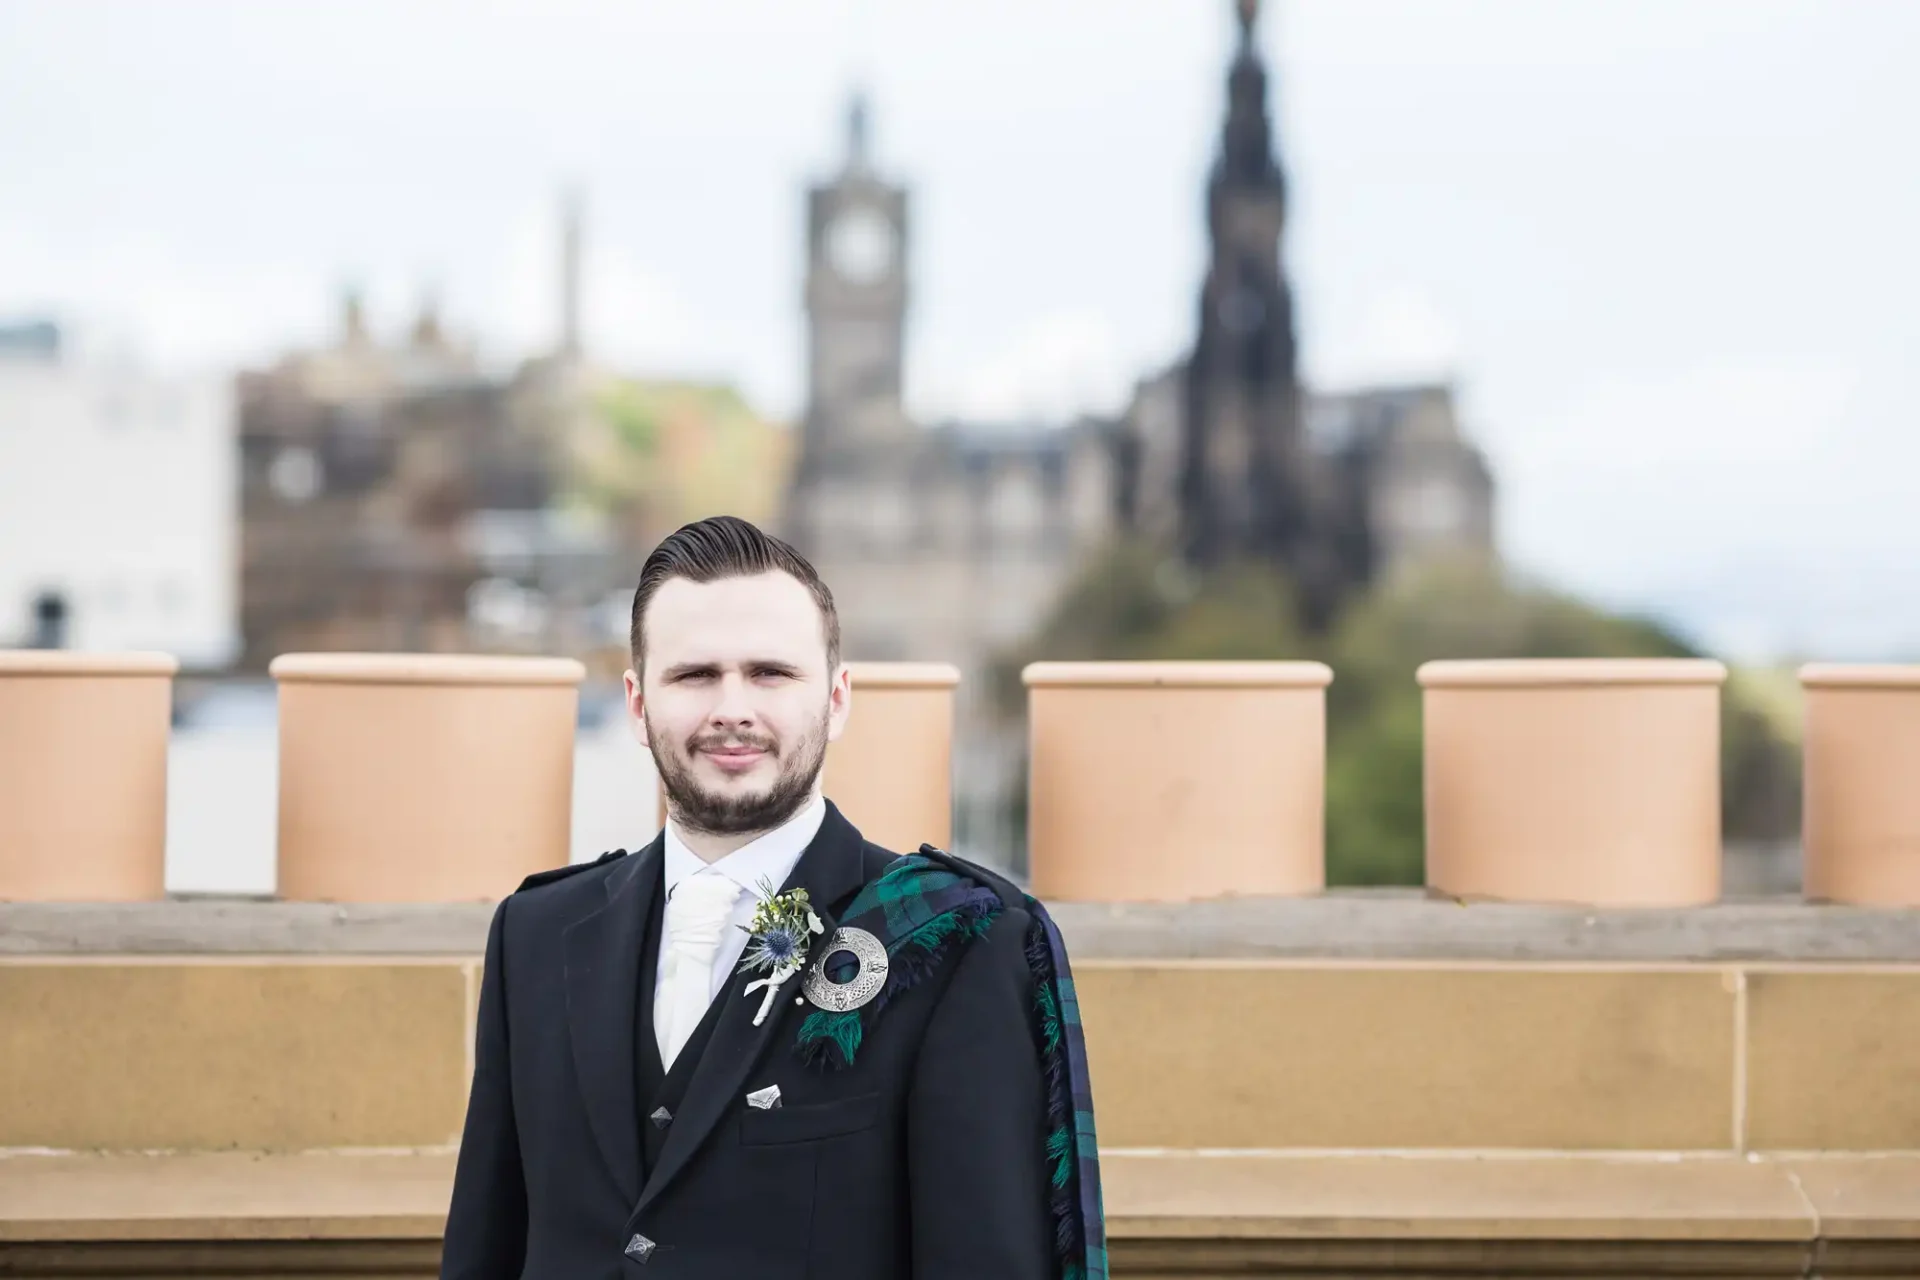 A man in a formal black suit and kilt standing in front of a historical cityscape with a castle in the background.